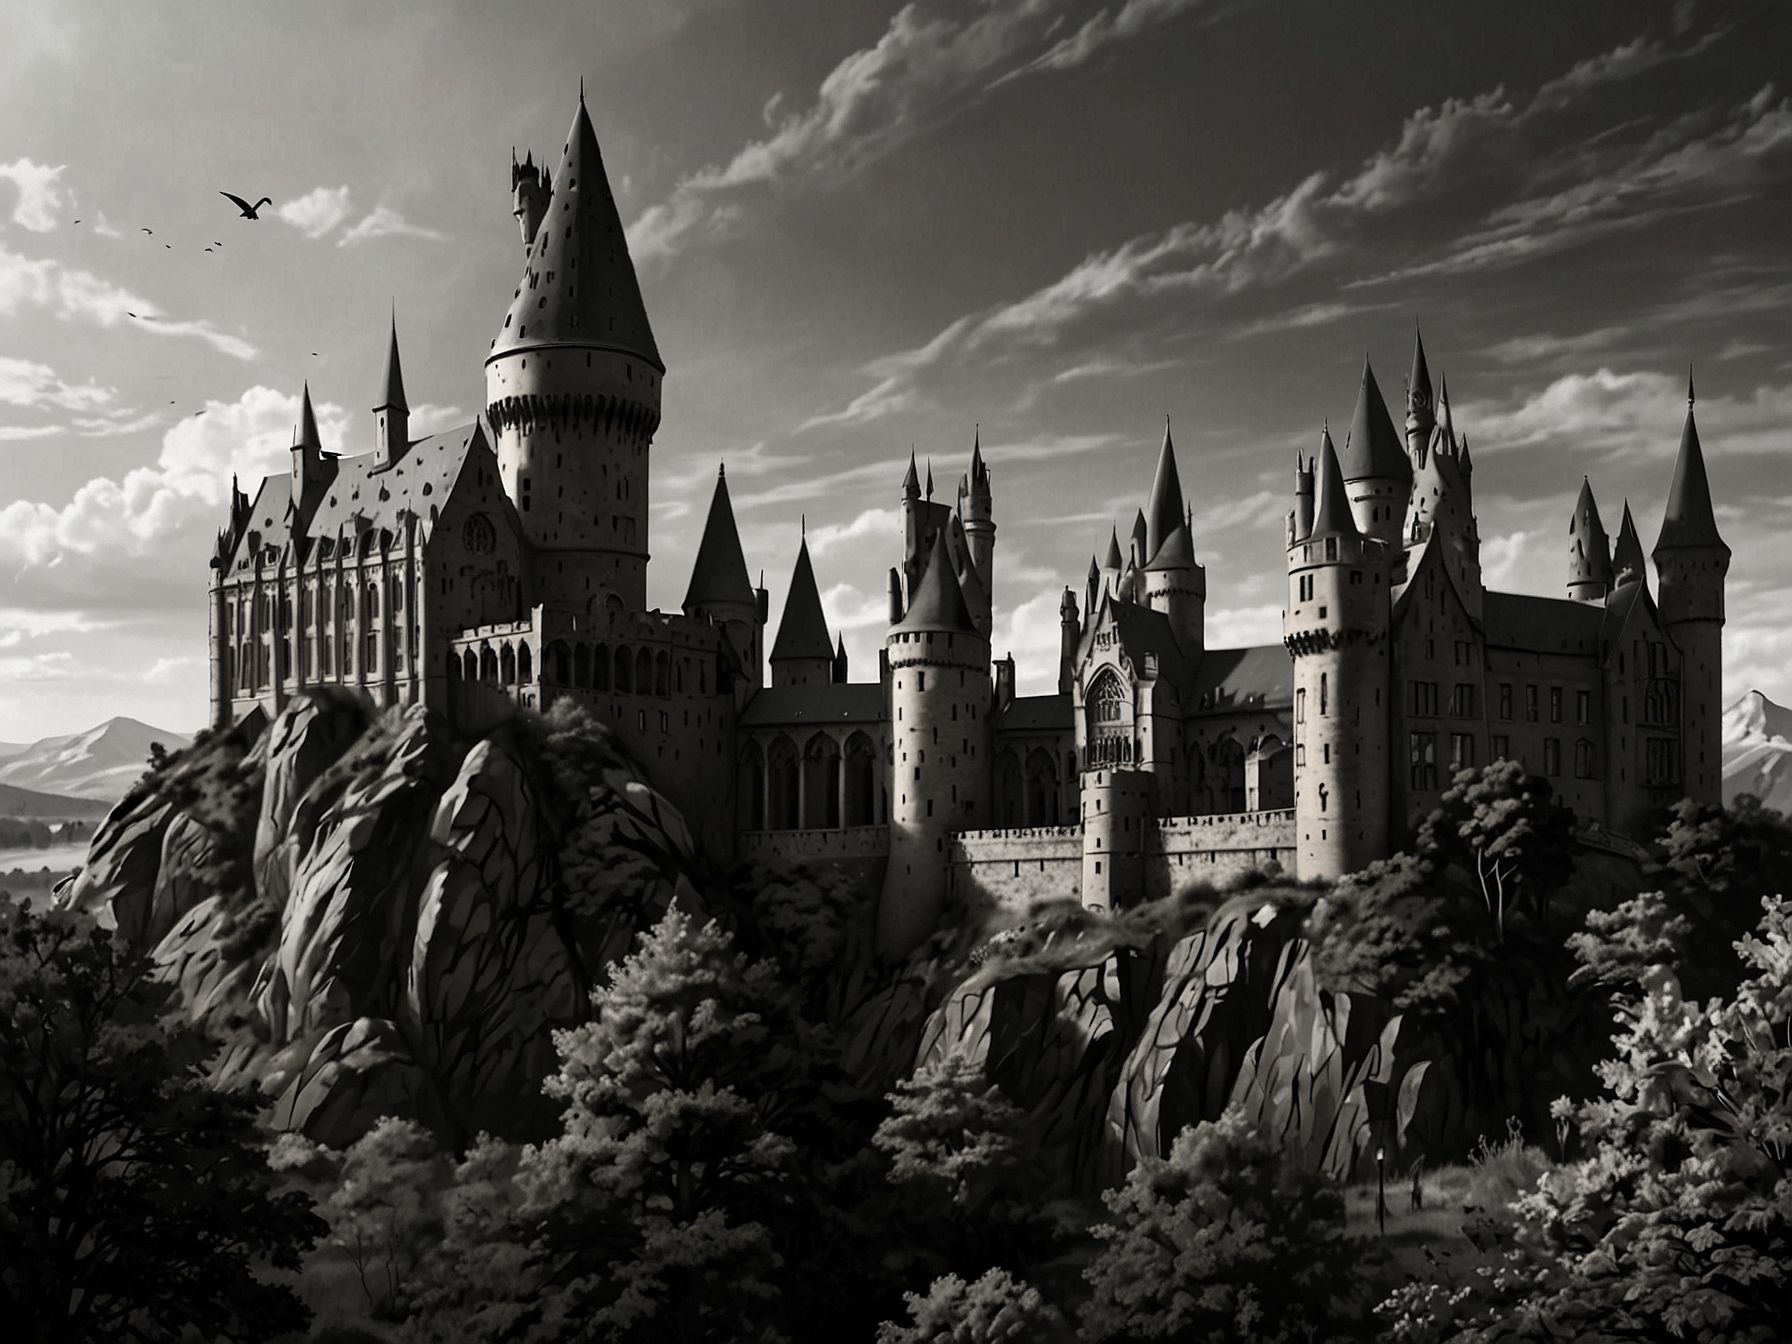 An artist’s rendering of a modernized Hogwarts with detailed characters from the Harry Potter series, indicating a fresh, character-driven approach. The image evokes both nostalgia and excitement.